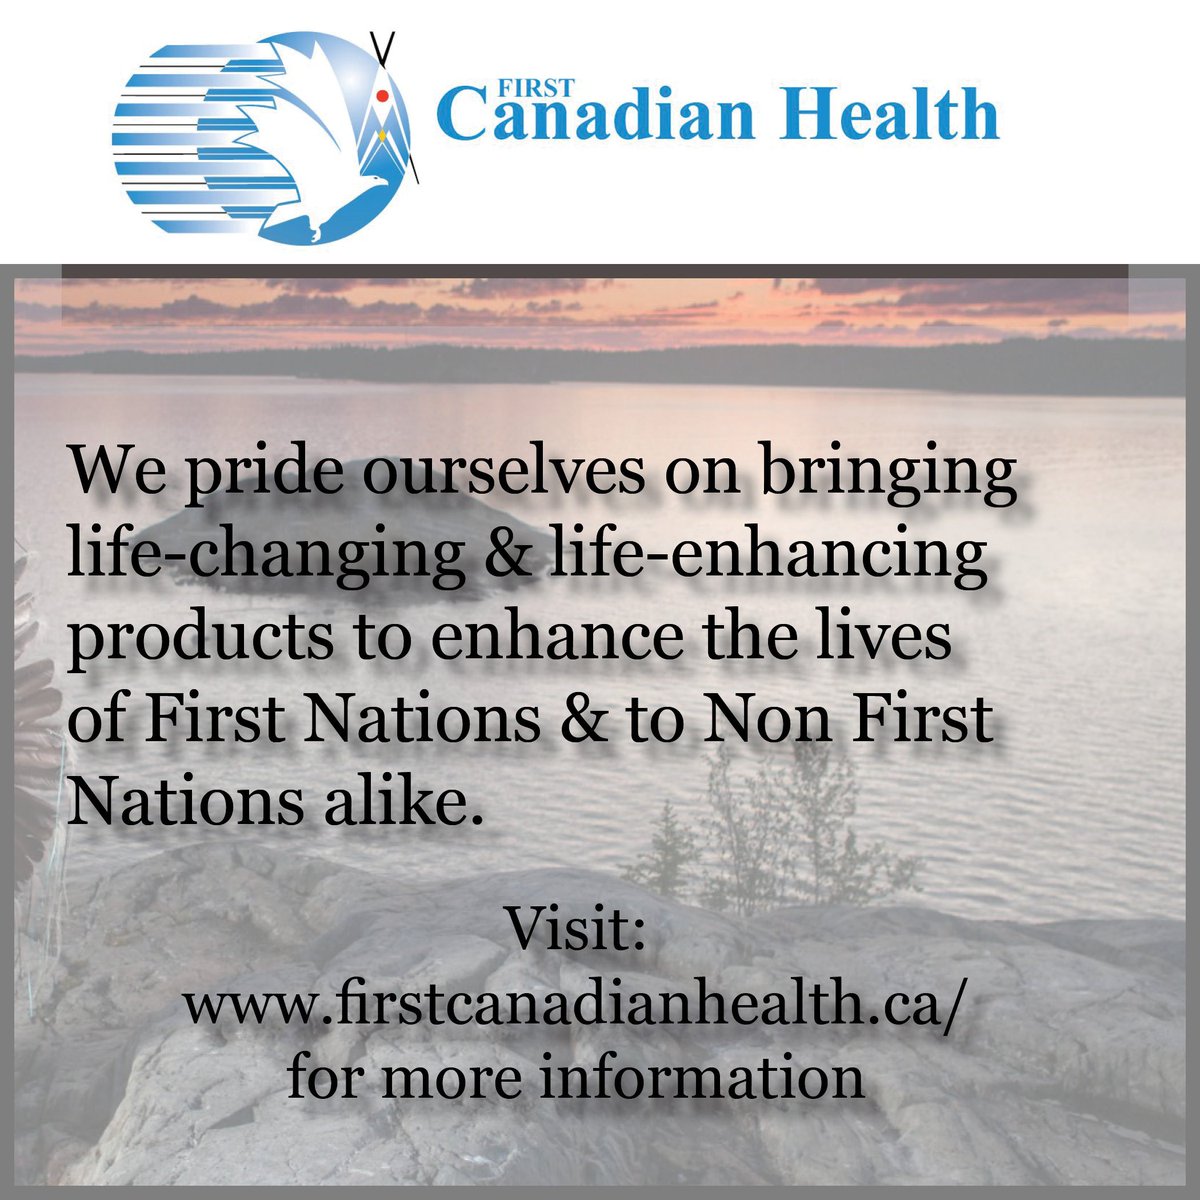 Find out more by visiting: firstcanadianhealth.ca/about/
#firstnationshealth #diabetesawareness #healthcanada @HealthCanada #Firstcanadianhealth